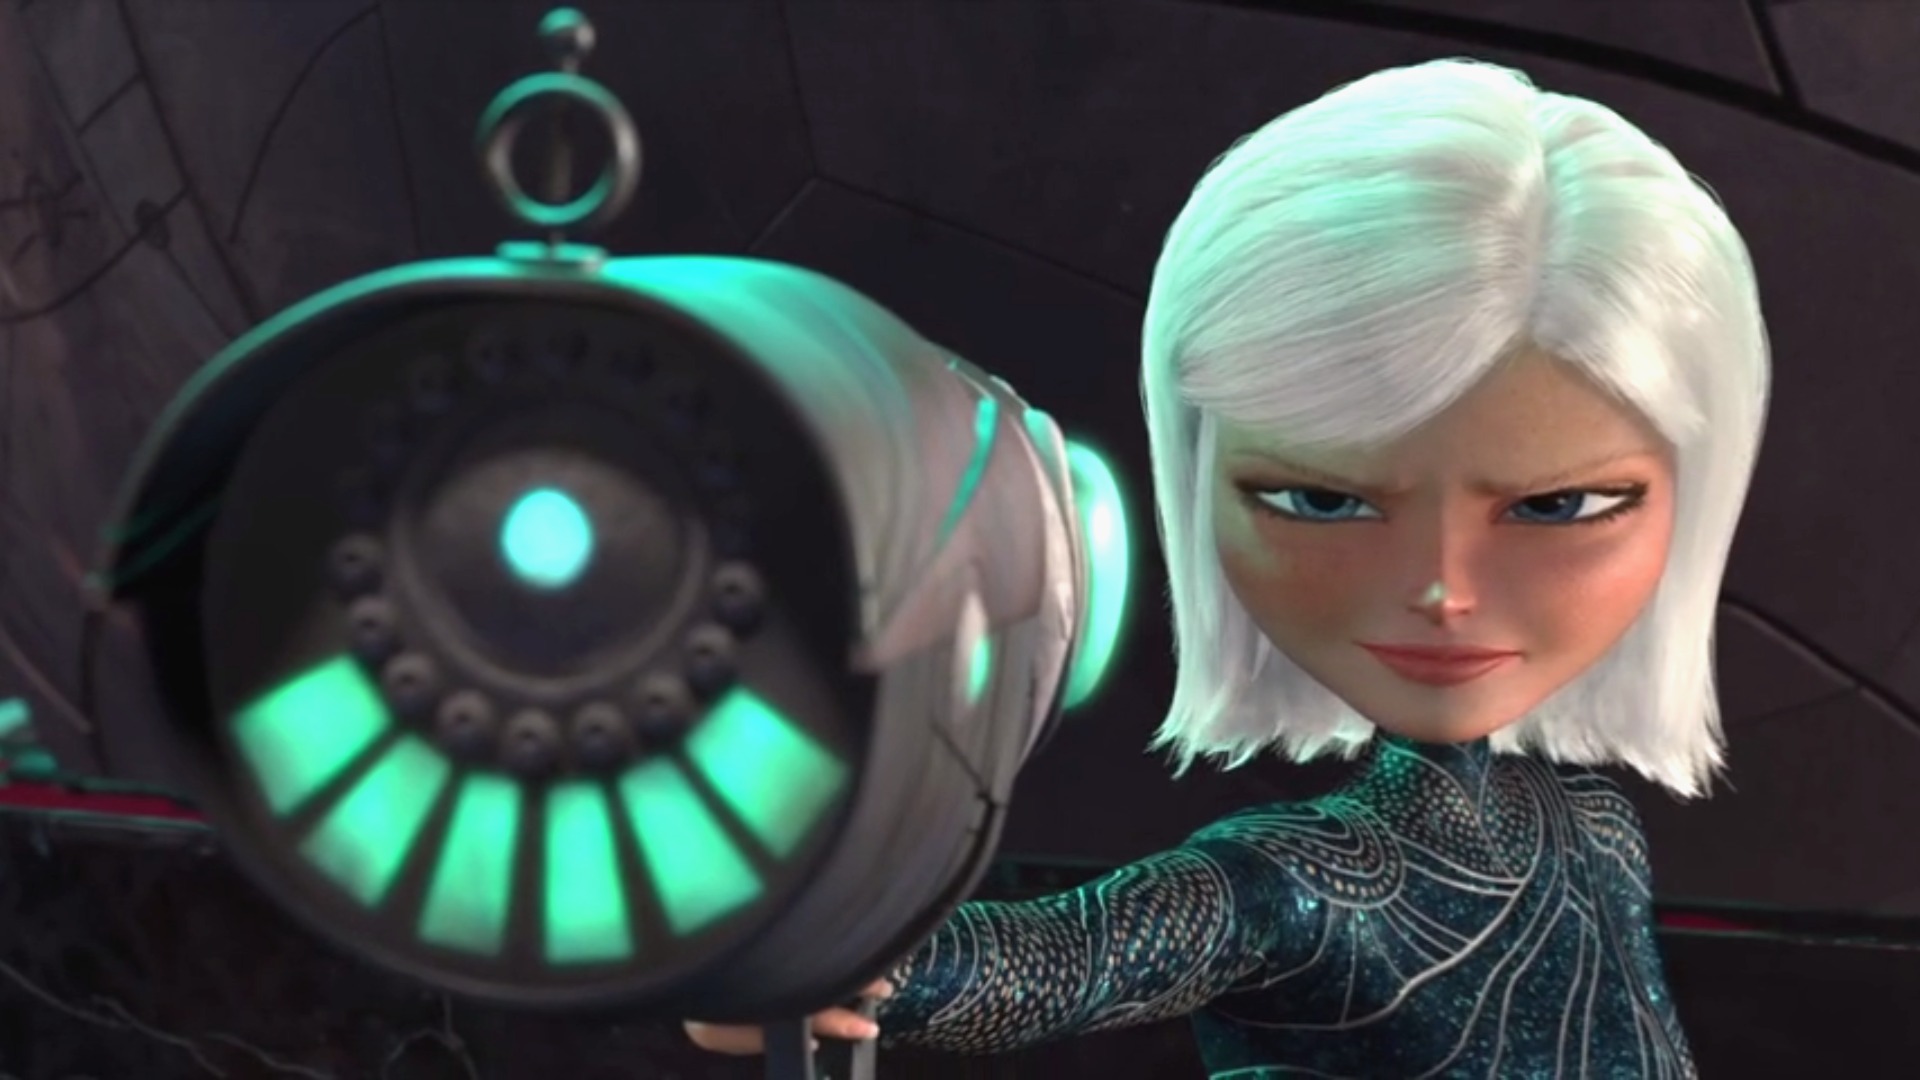 Monsters vs. Aliens' creates another dimension - The San Diego